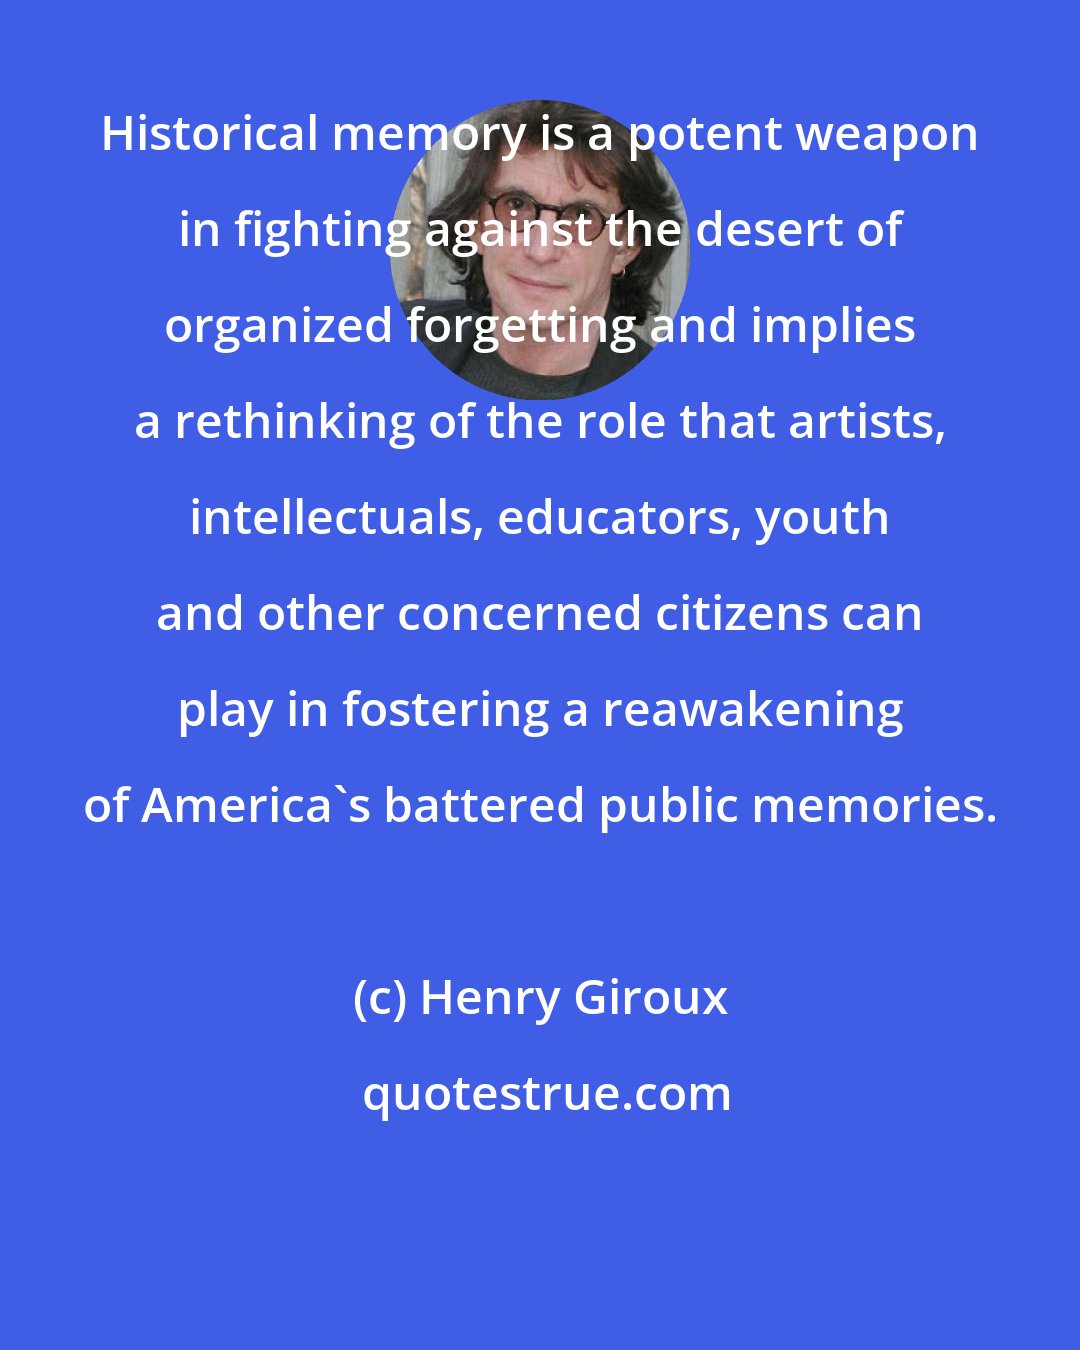 Henry Giroux: Historical memory is a potent weapon in fighting against the desert of organized forgetting and implies a rethinking of the role that artists, intellectuals, educators, youth and other concerned citizens can play in fostering a reawakening of America's battered public memories.